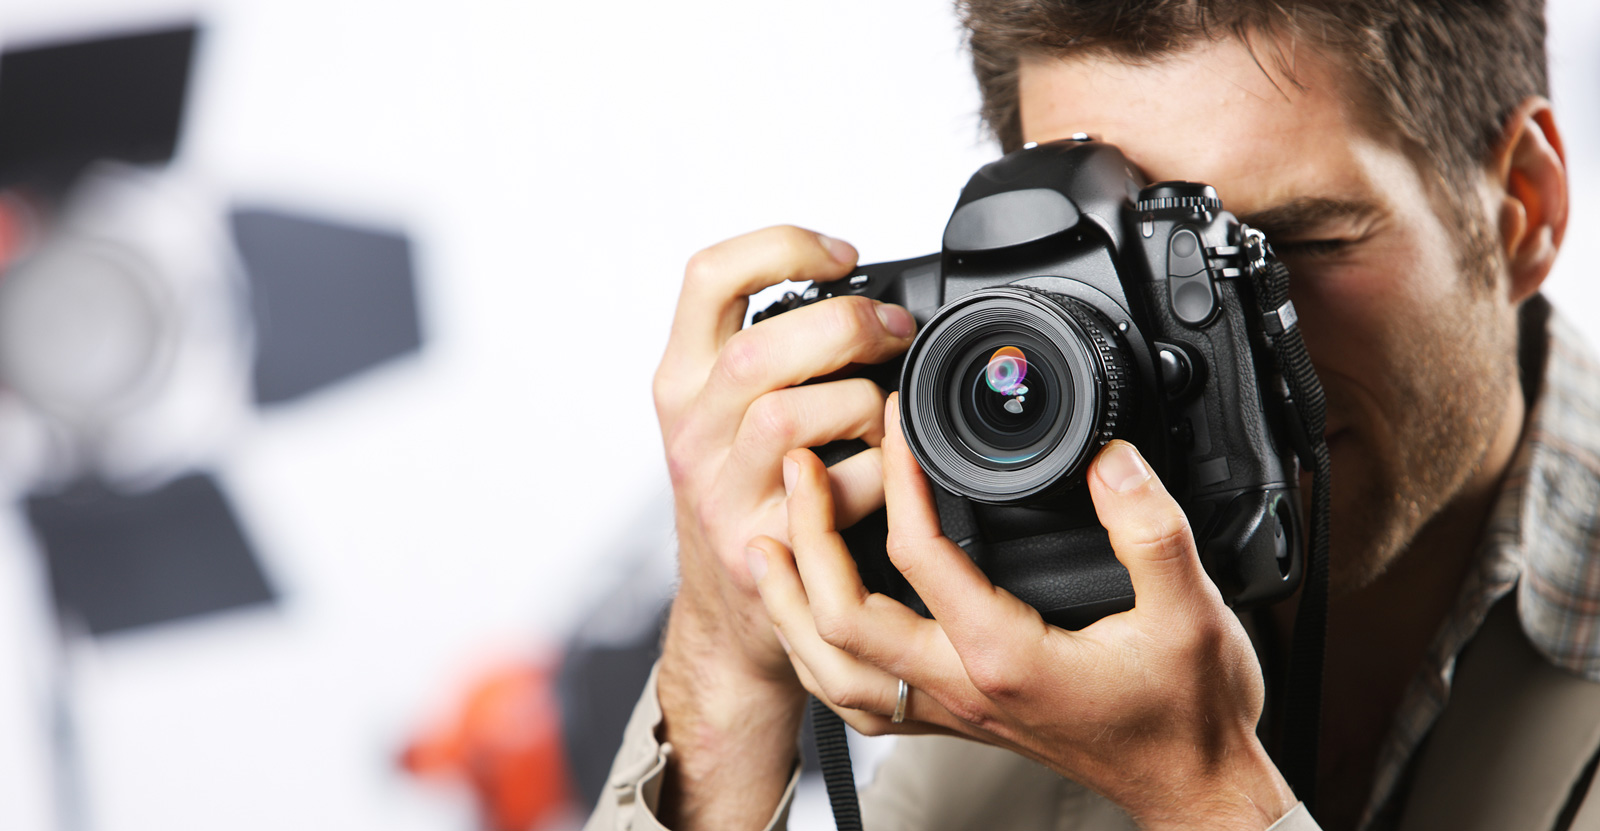 10-Things-That-Wreak-Havoc-For-A-Photographer